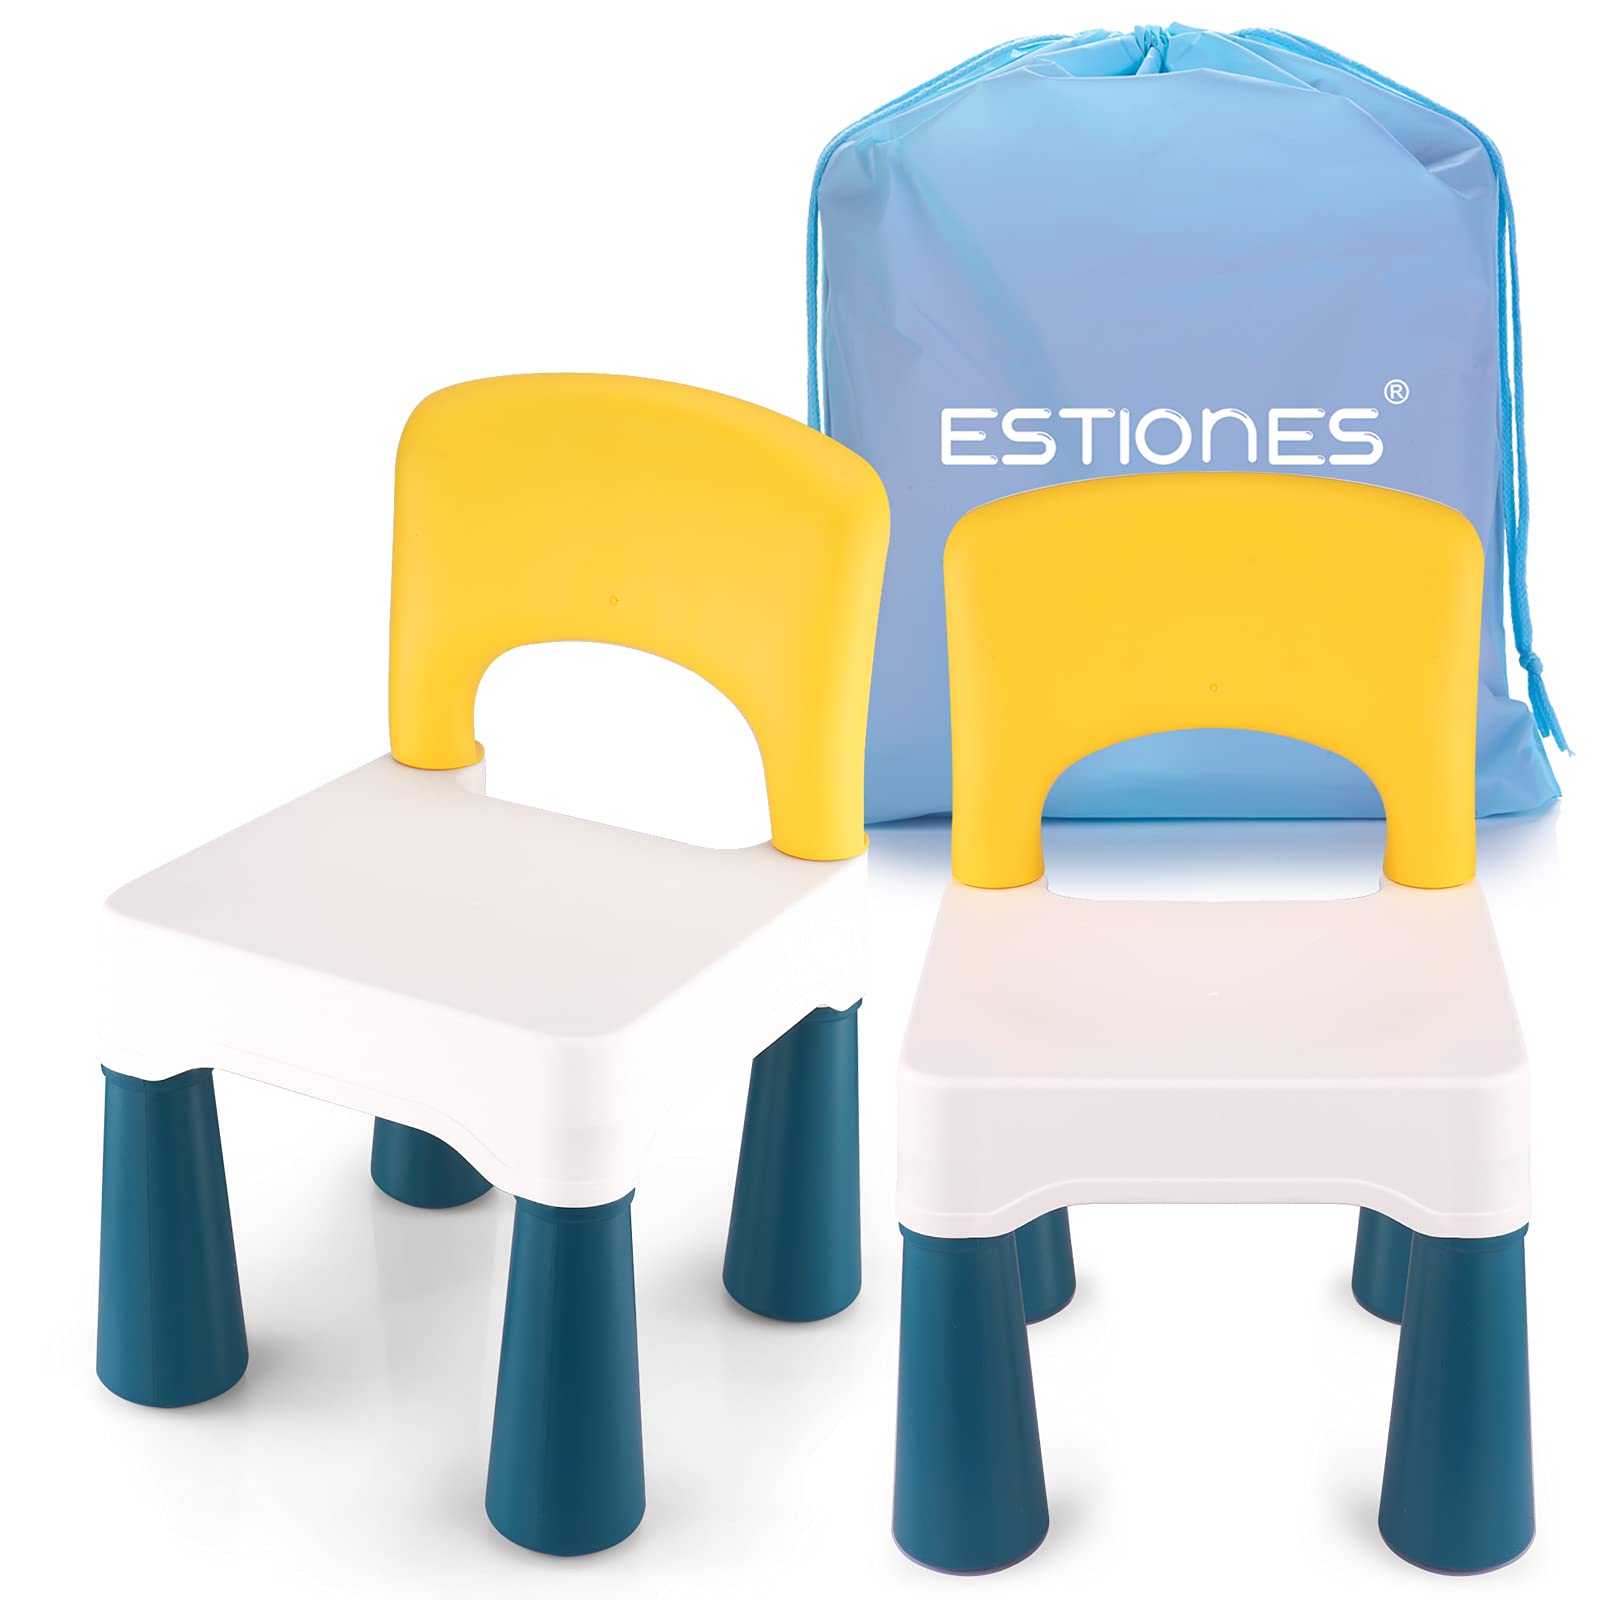 Kids Chair, Toddler Chair, Toddler Chairs for Boys and Girls, Ergonomic Design, Eco-Friendly Durable Plastic, Indoor or Outdoor Use Kids Chairs for...